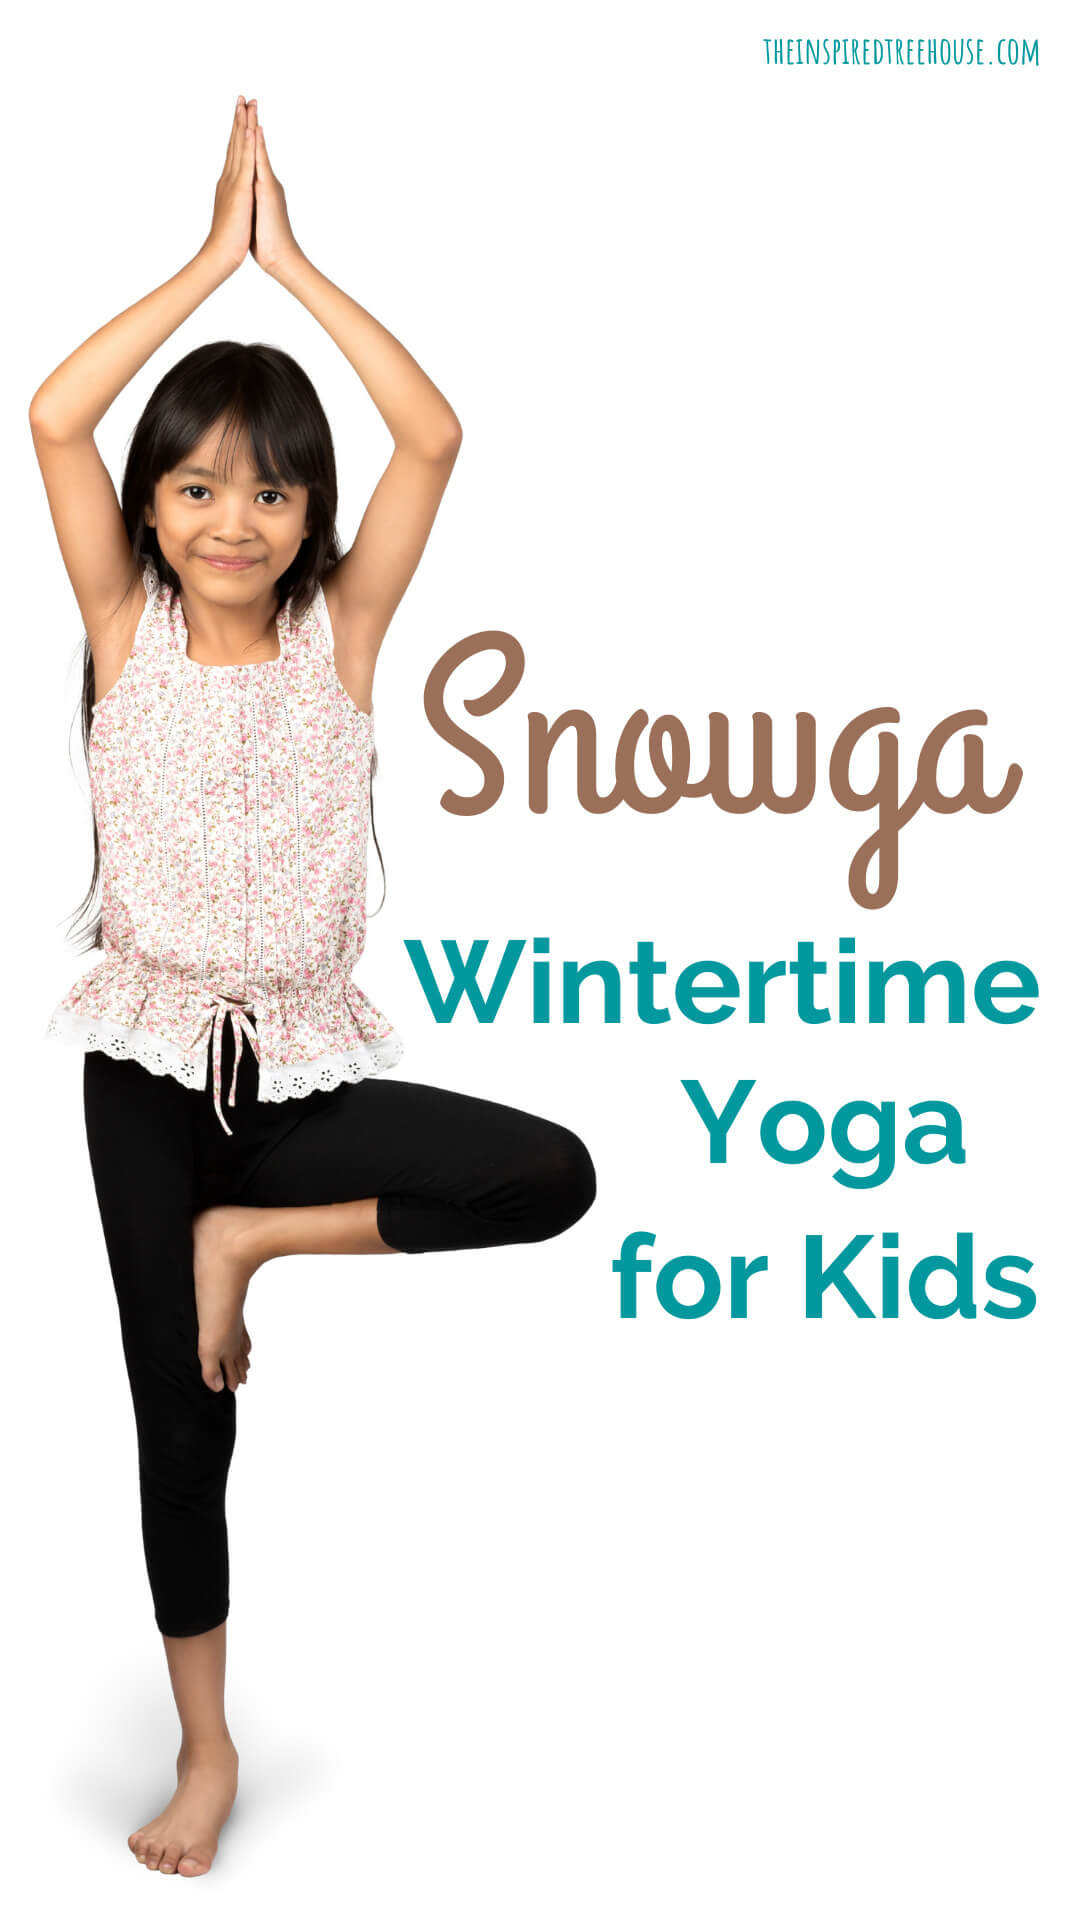 Four Poses to Get Kids Started With Yoga | The Centre-cheohanoi.vn